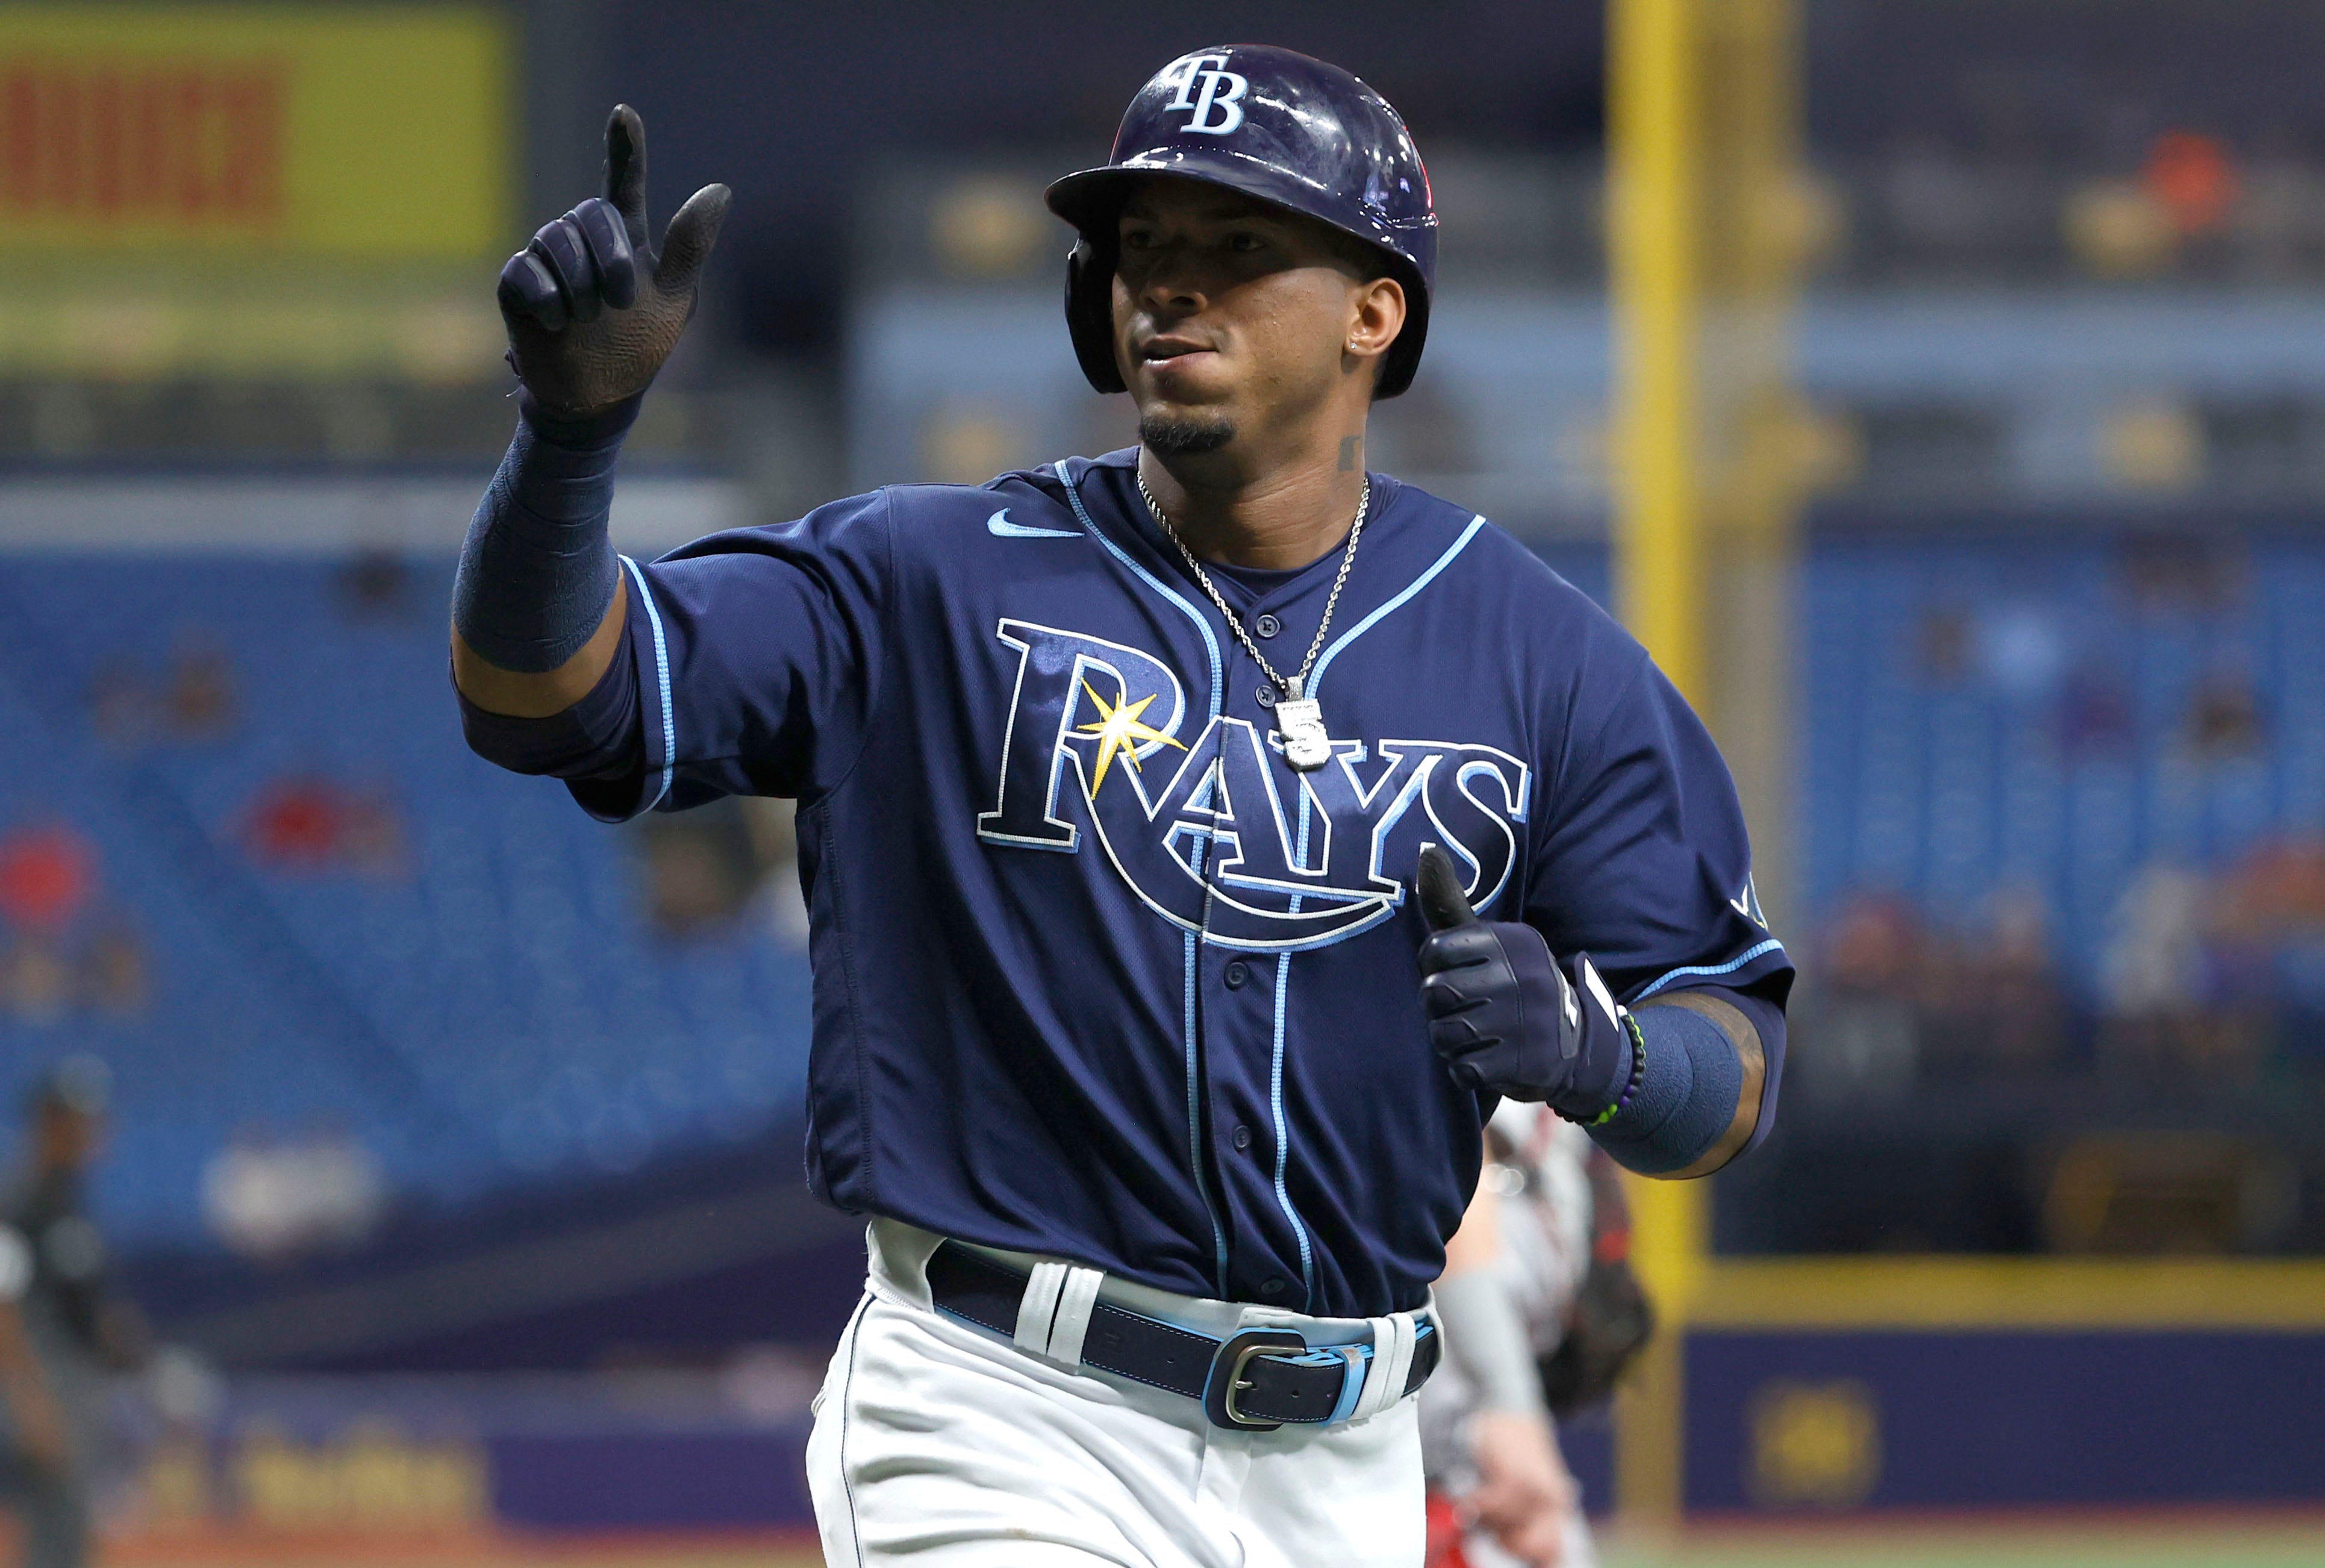 Wander Franco stats: 20-year-old is making history with Rays